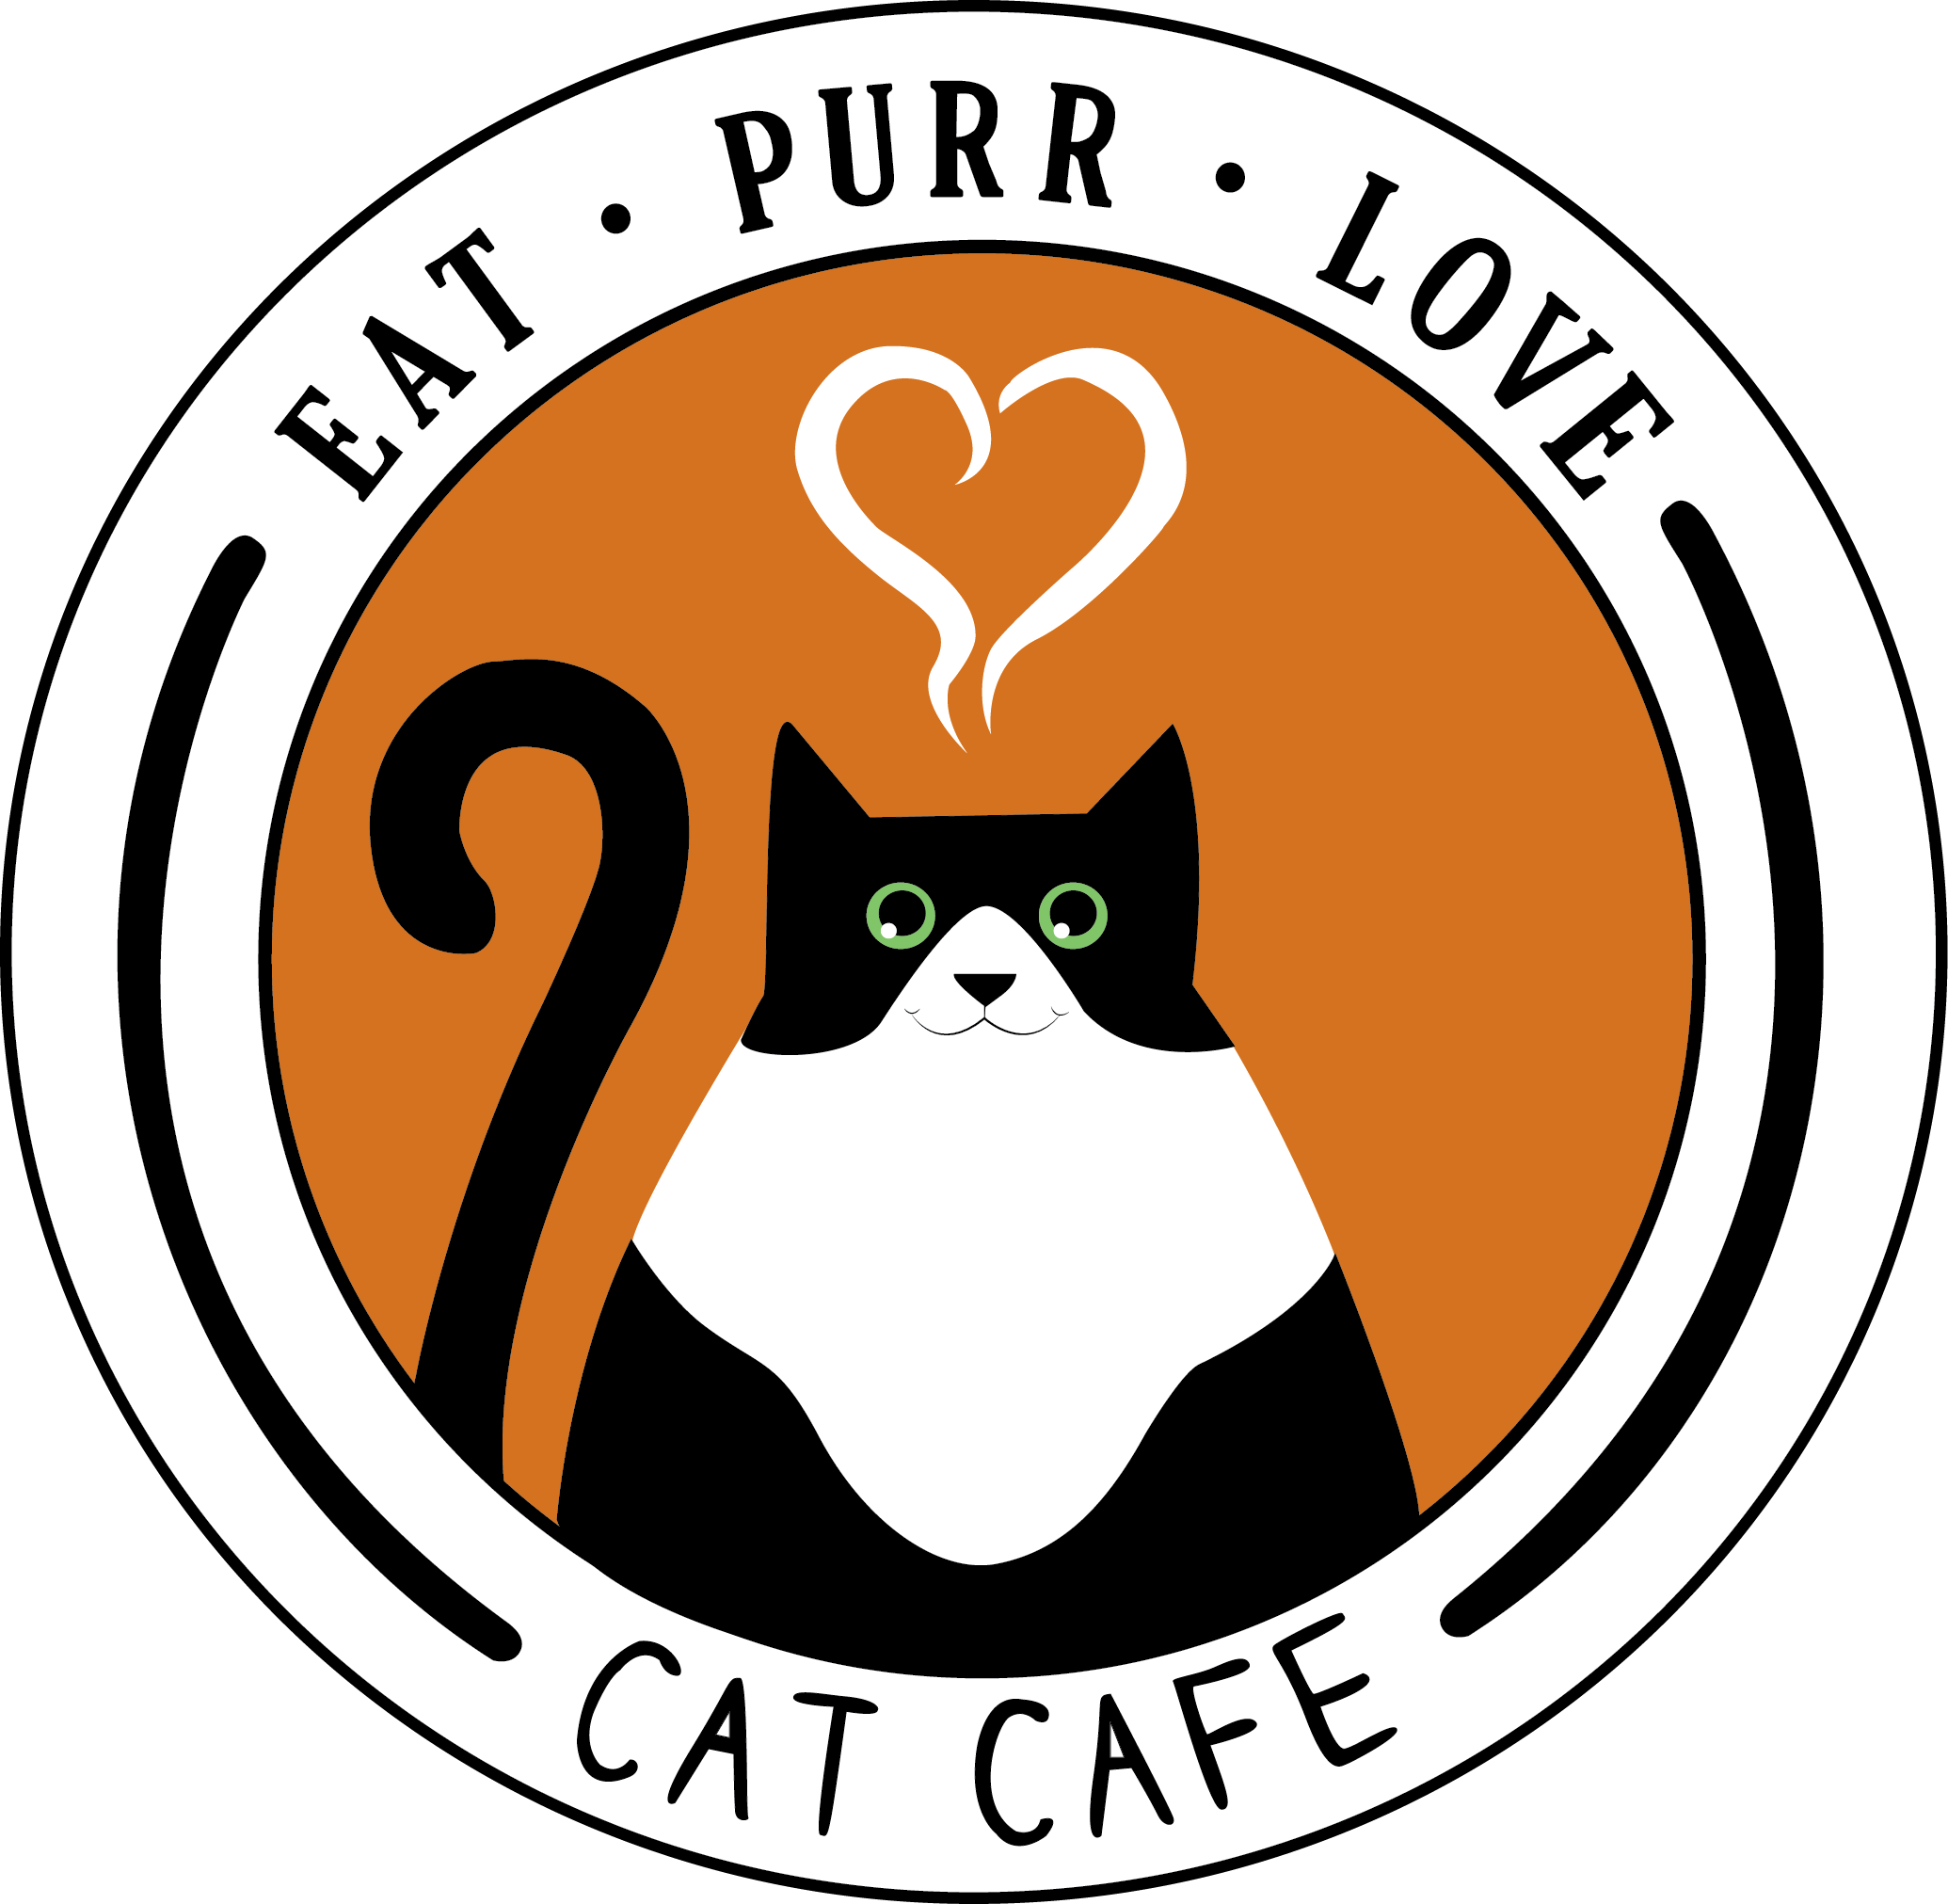 Kittens clipart purr. Eat love cat caf